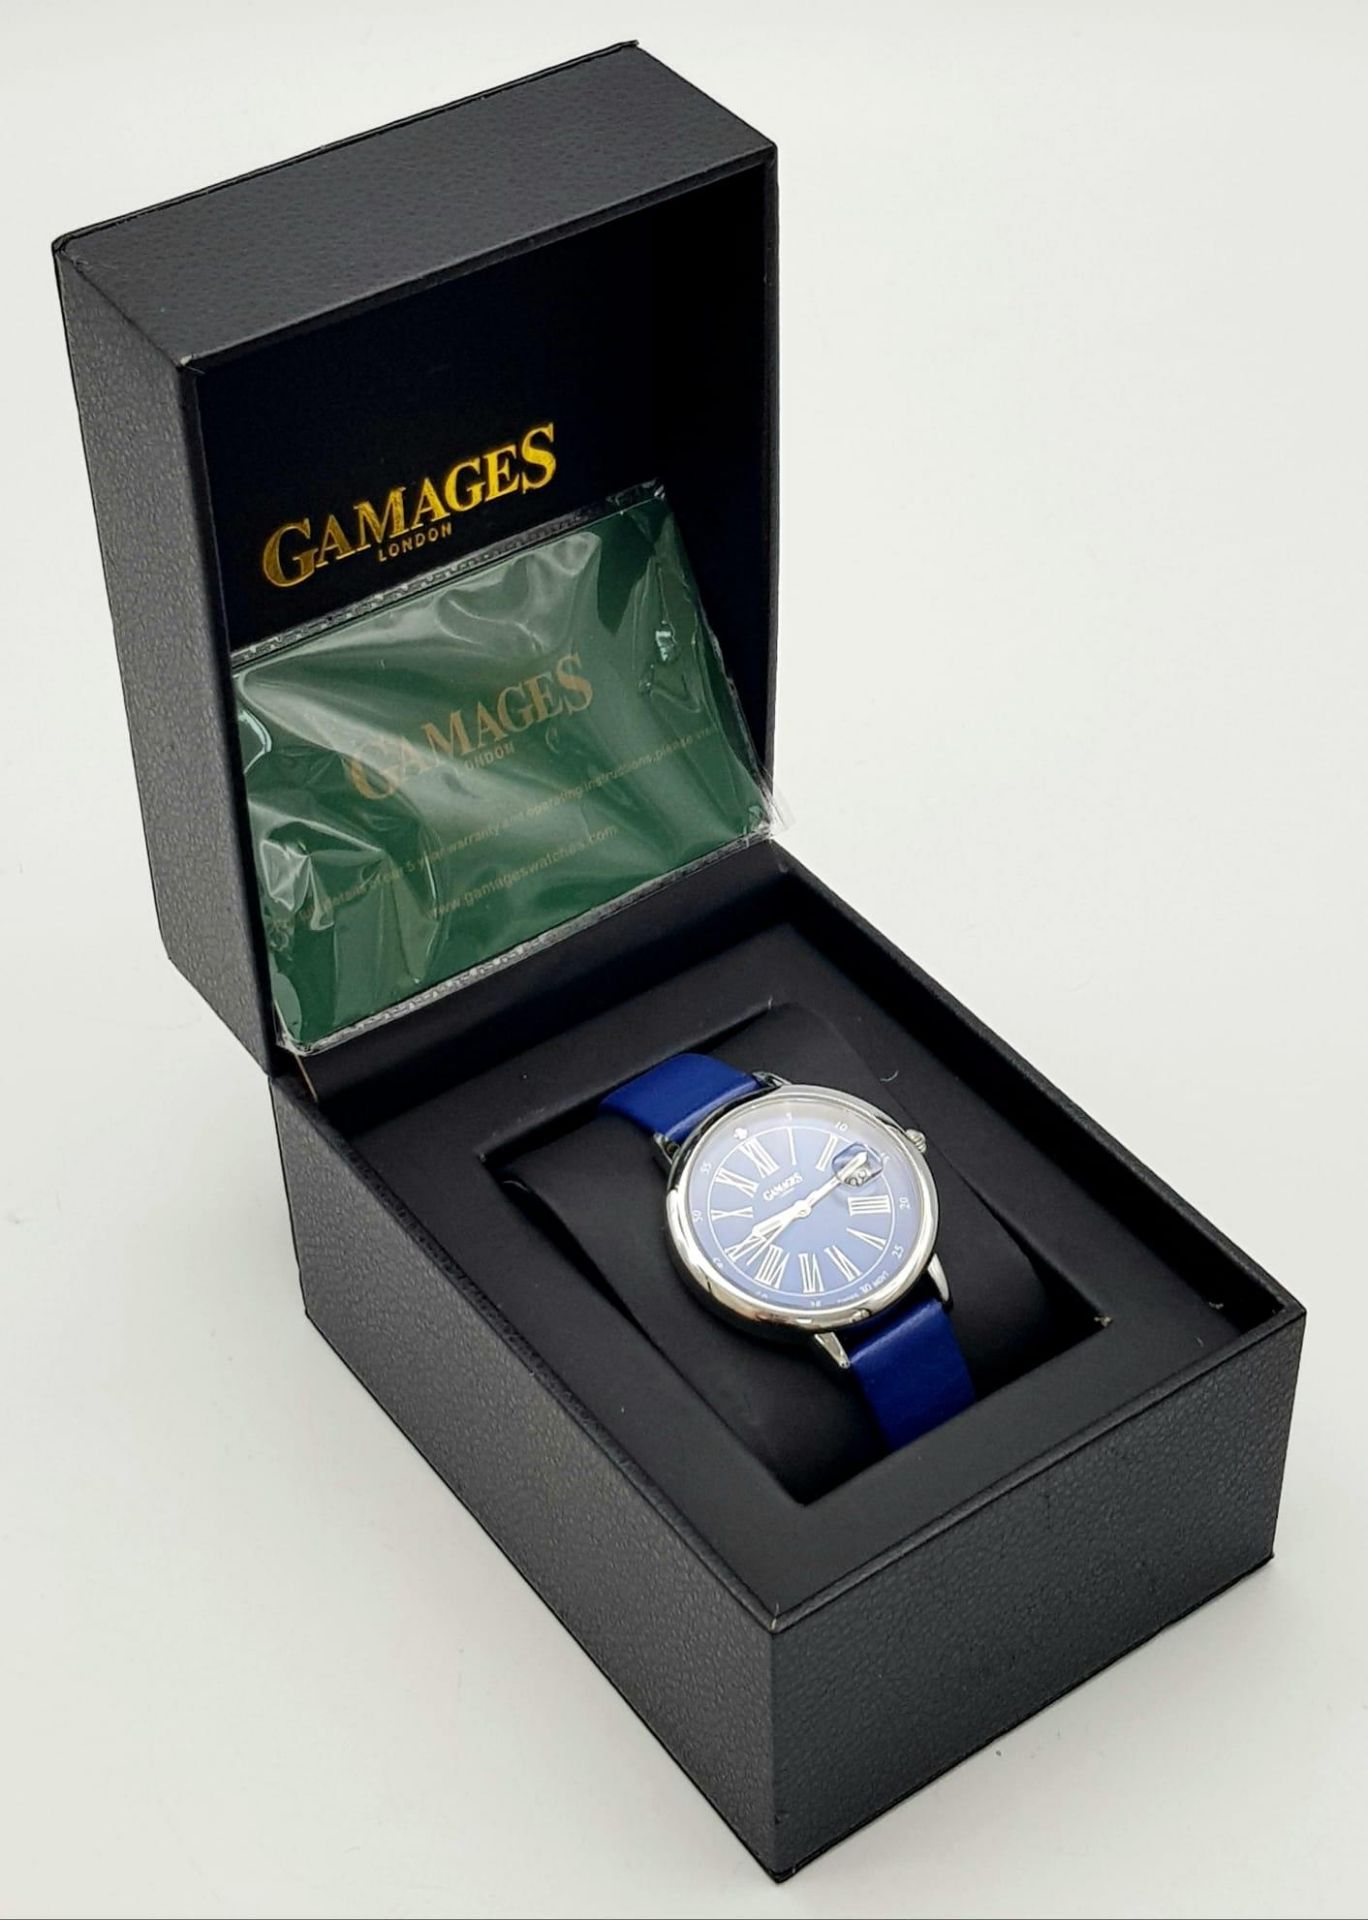 A Gamages of London Quartz Ladies Watch. Blue leather strap. Stainless steel case - 37mm. Ice blue - Image 6 of 6